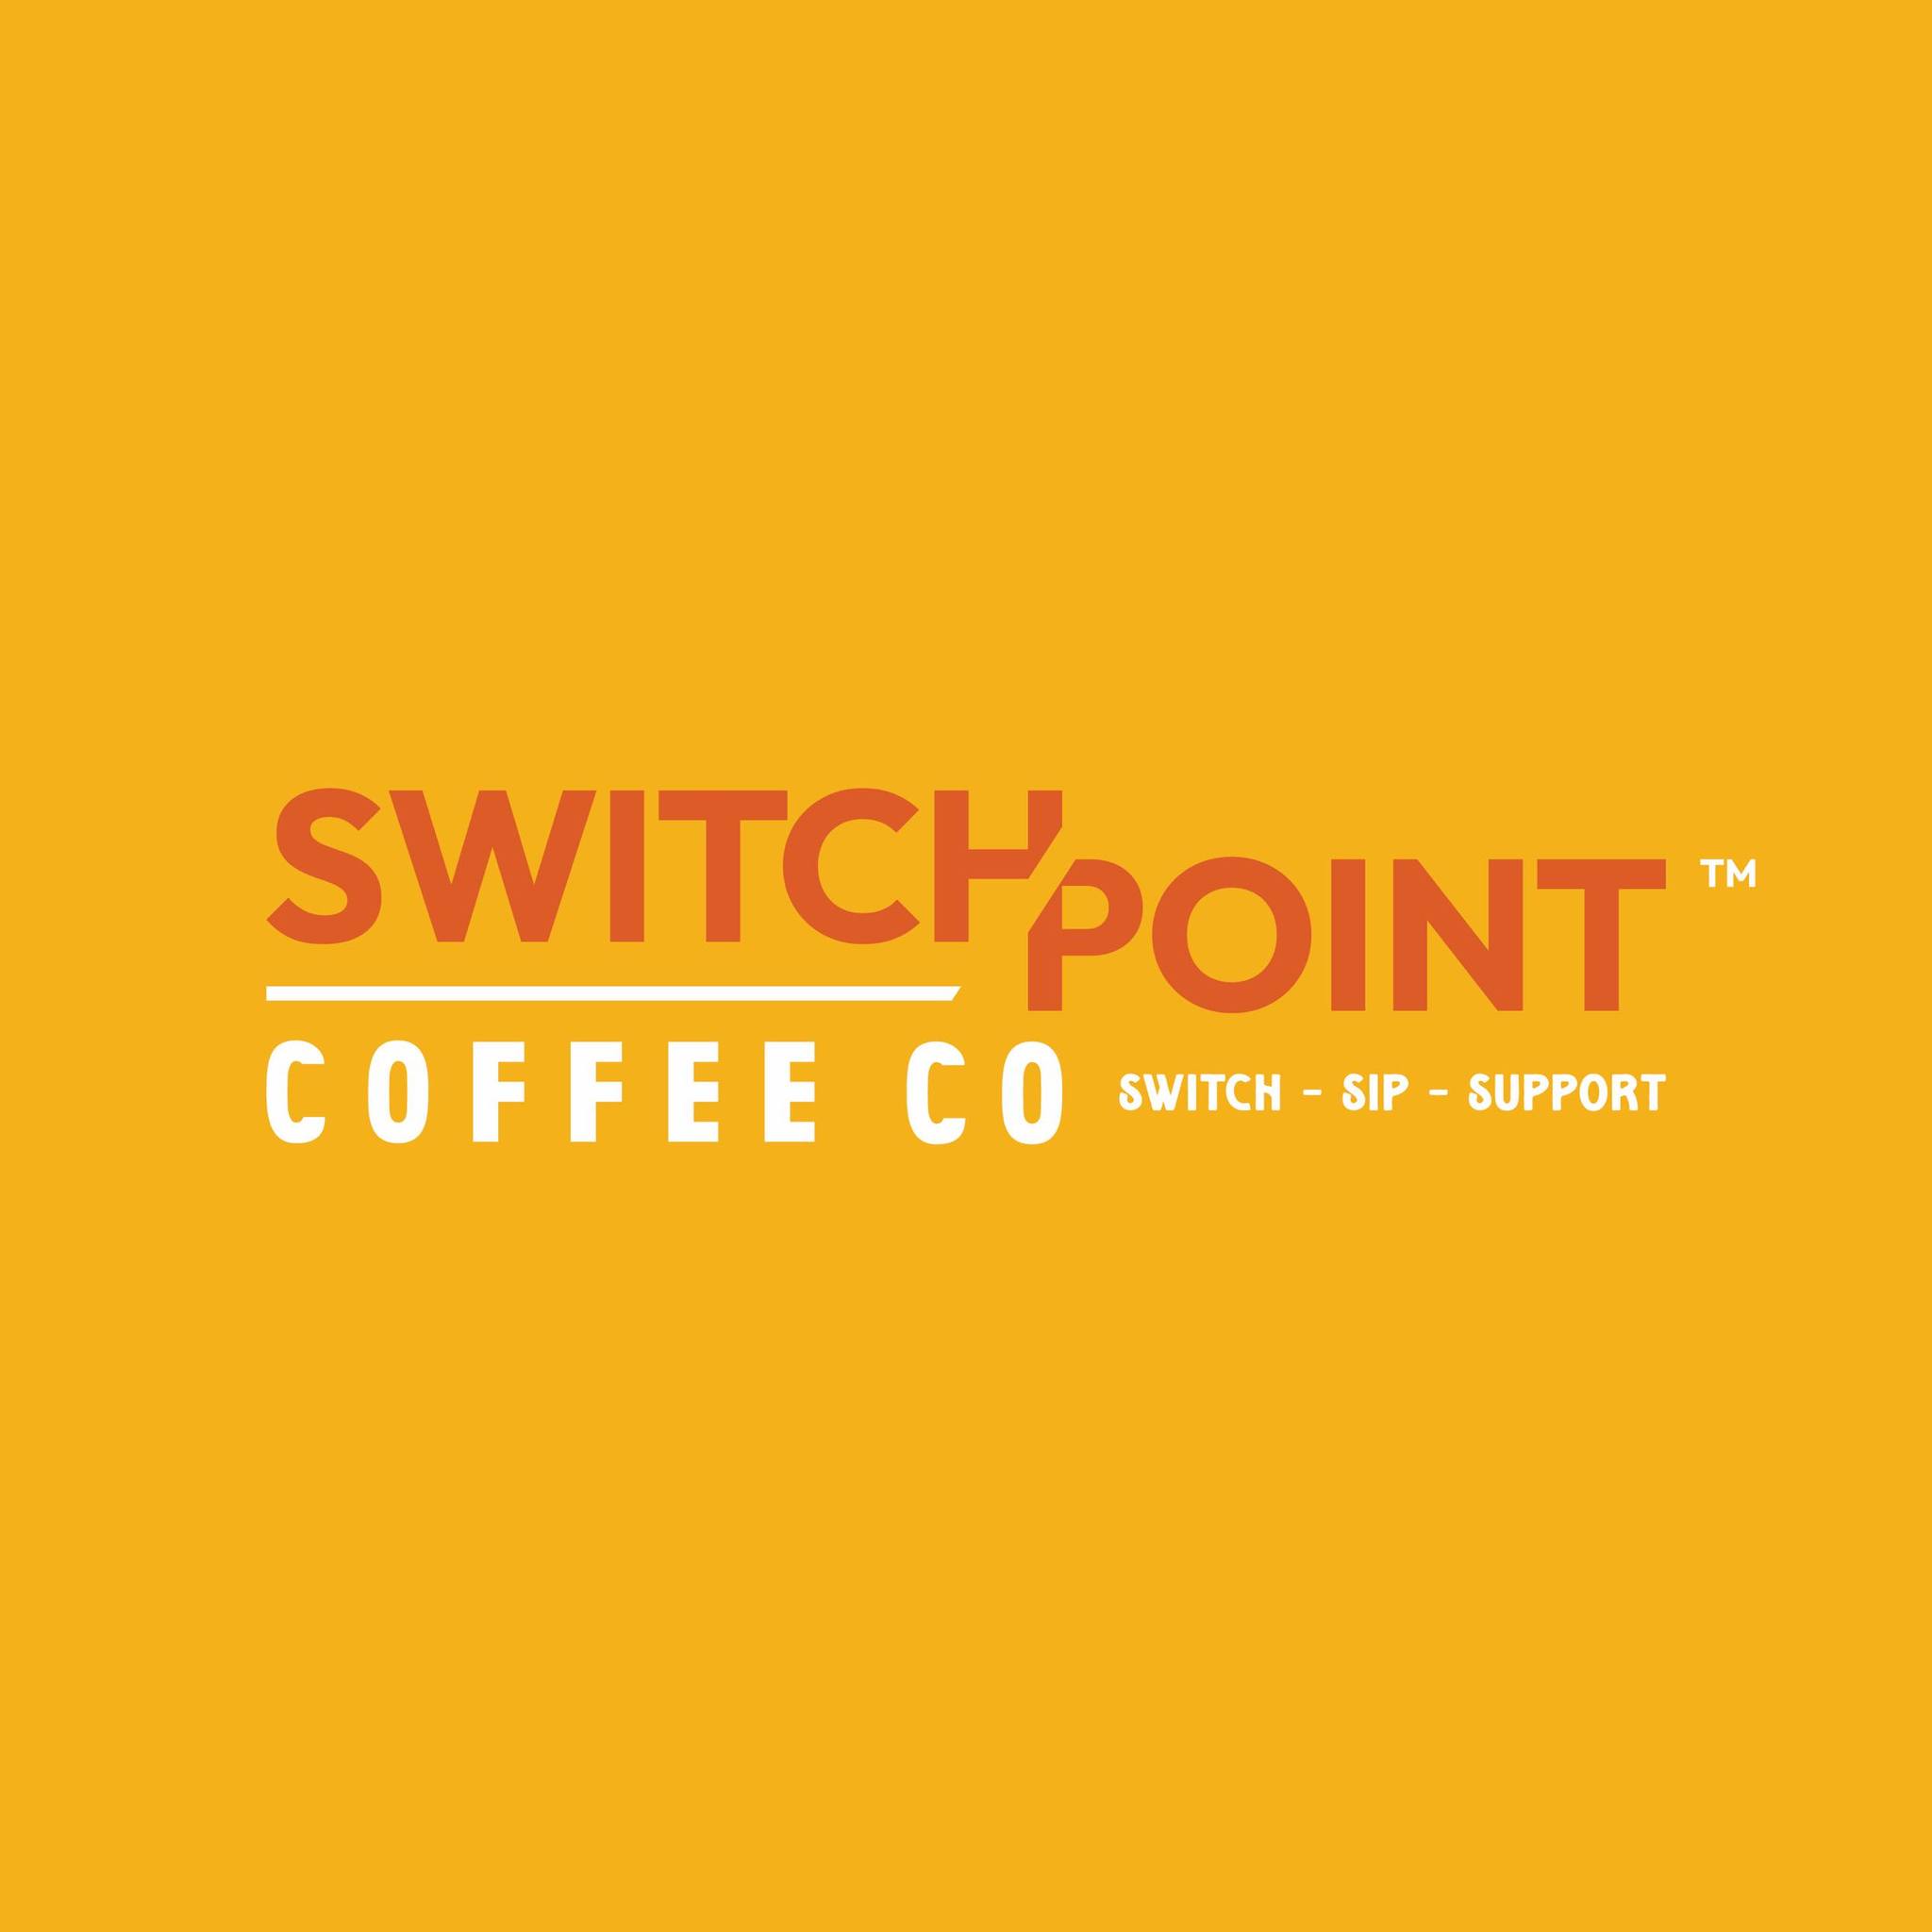 Switchpoint Coffee Co logo